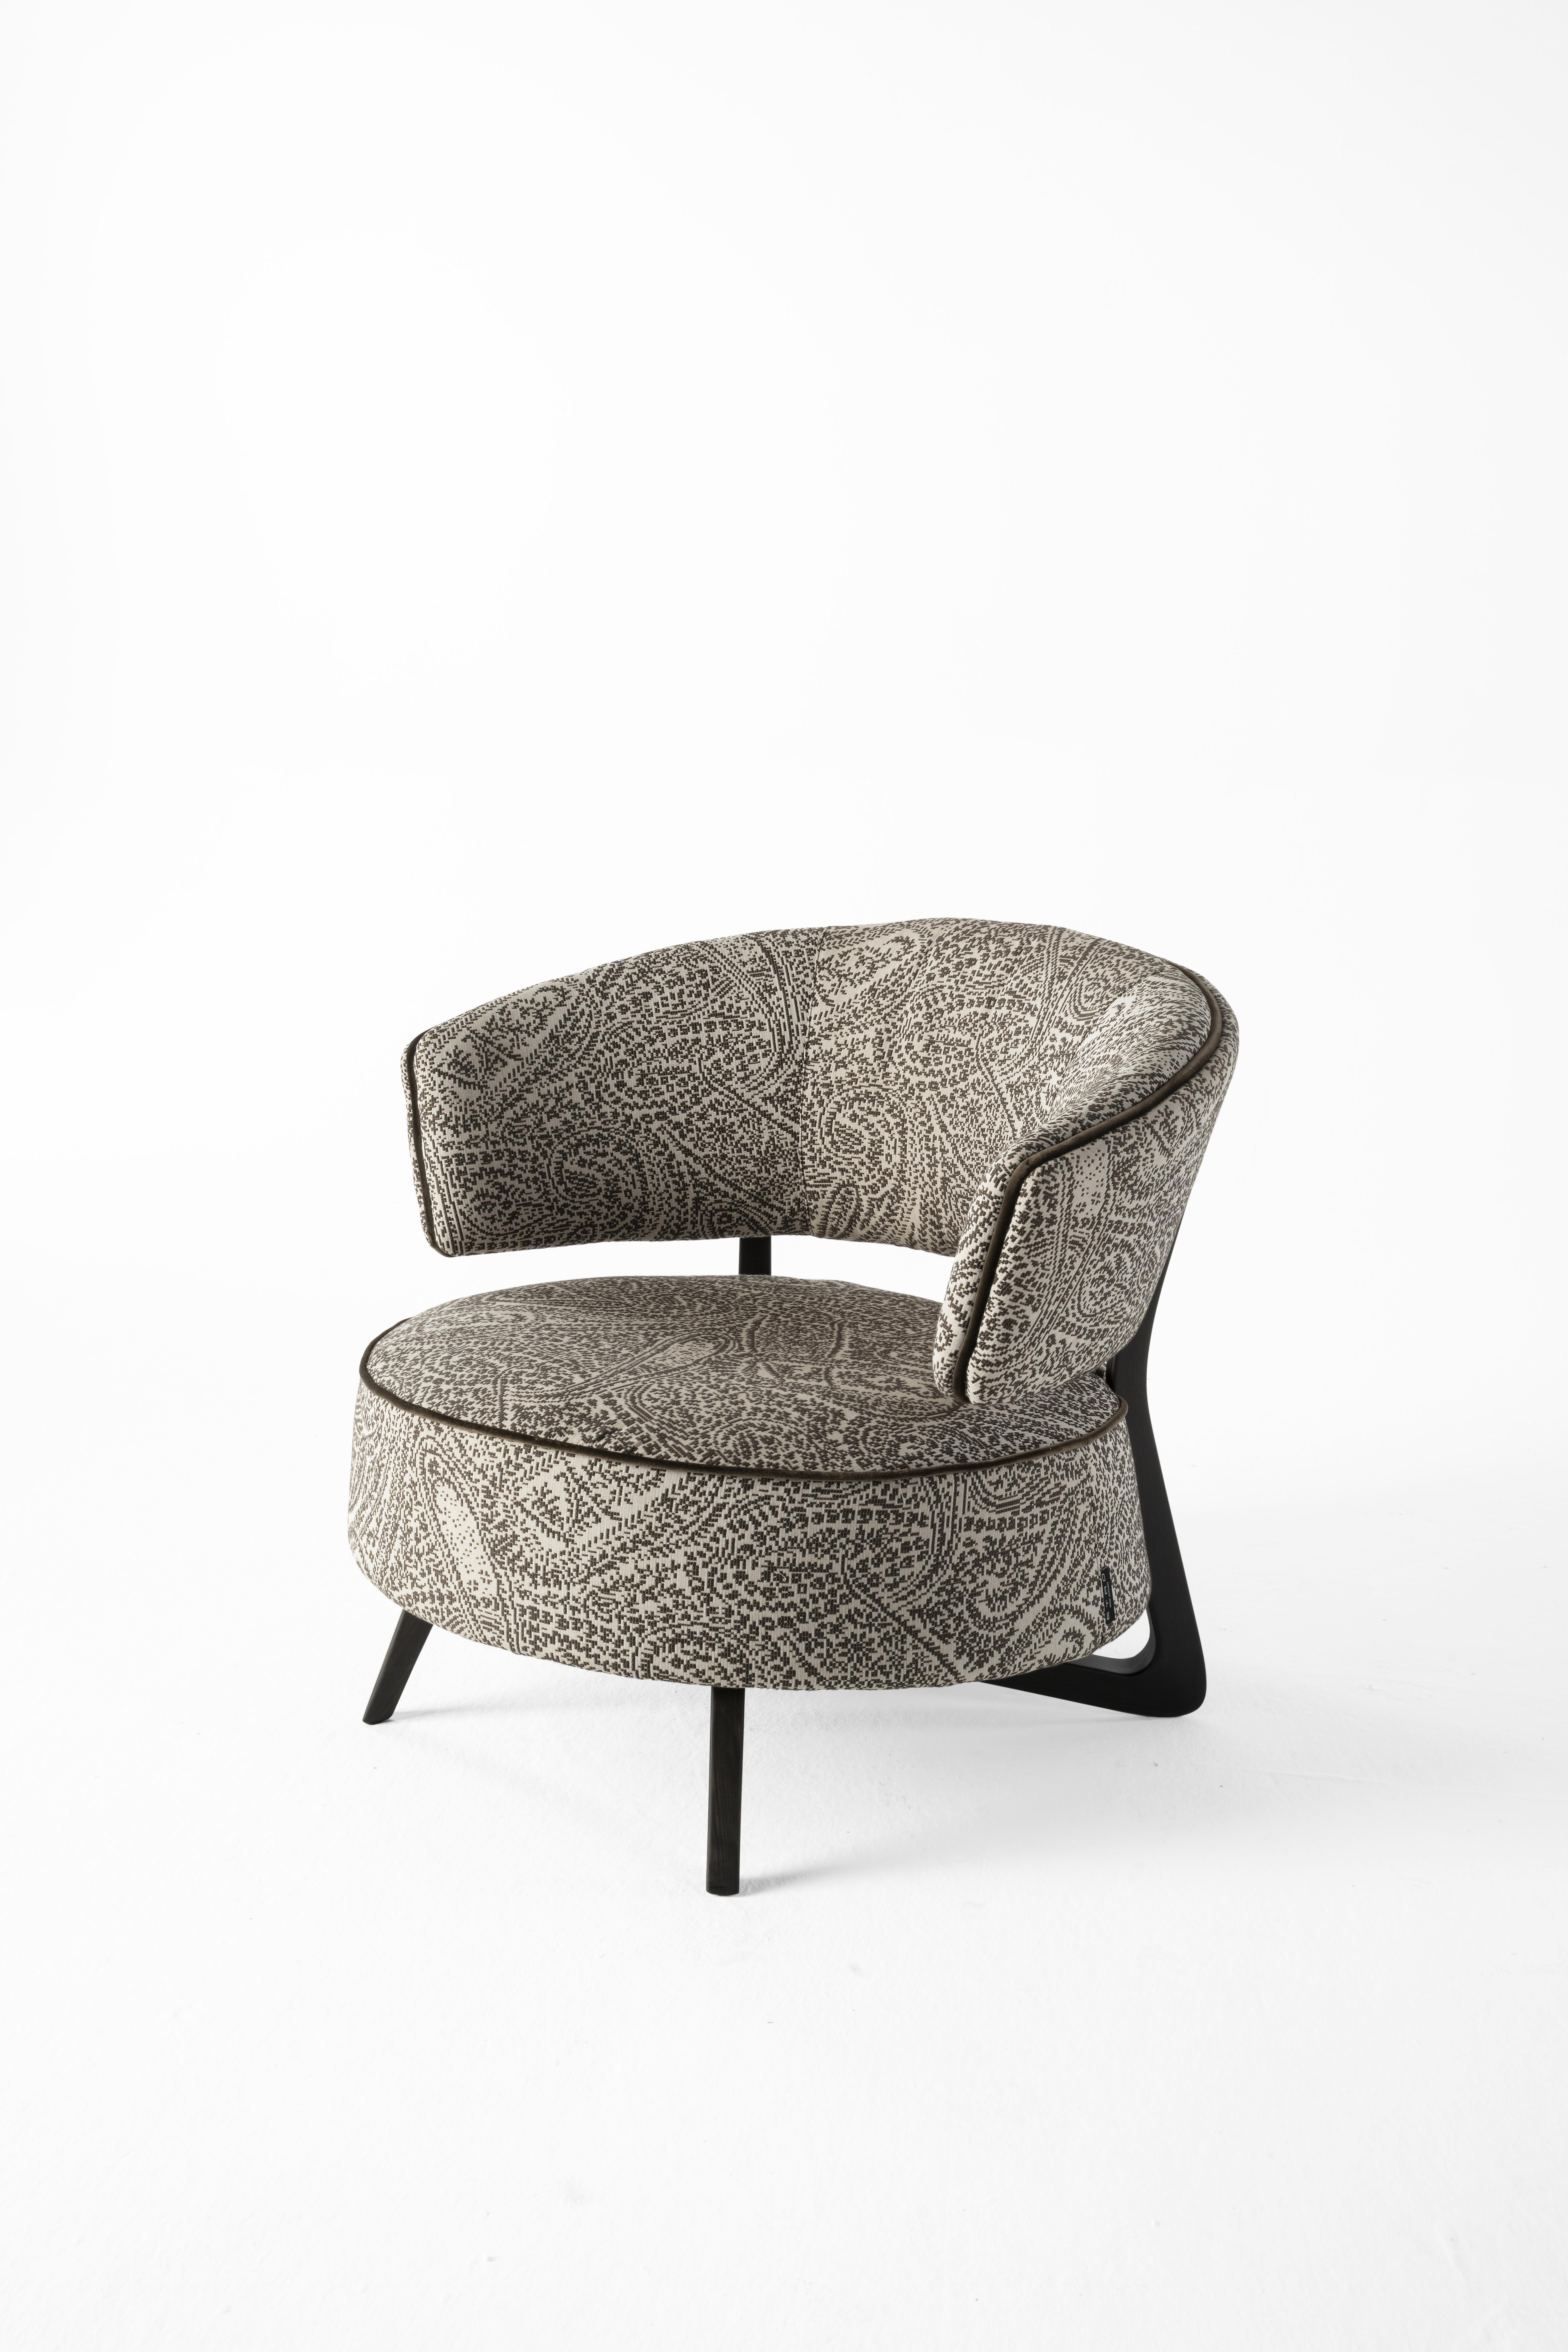 Elegant, enveloping and comfortable, the Diana armchair celebrates the eclectic and versatile soul of the ETRO Home Interiors line. The vintage structure with a 50s-inspired design is made of solid wood in dark wengé colour and is enhanced by the